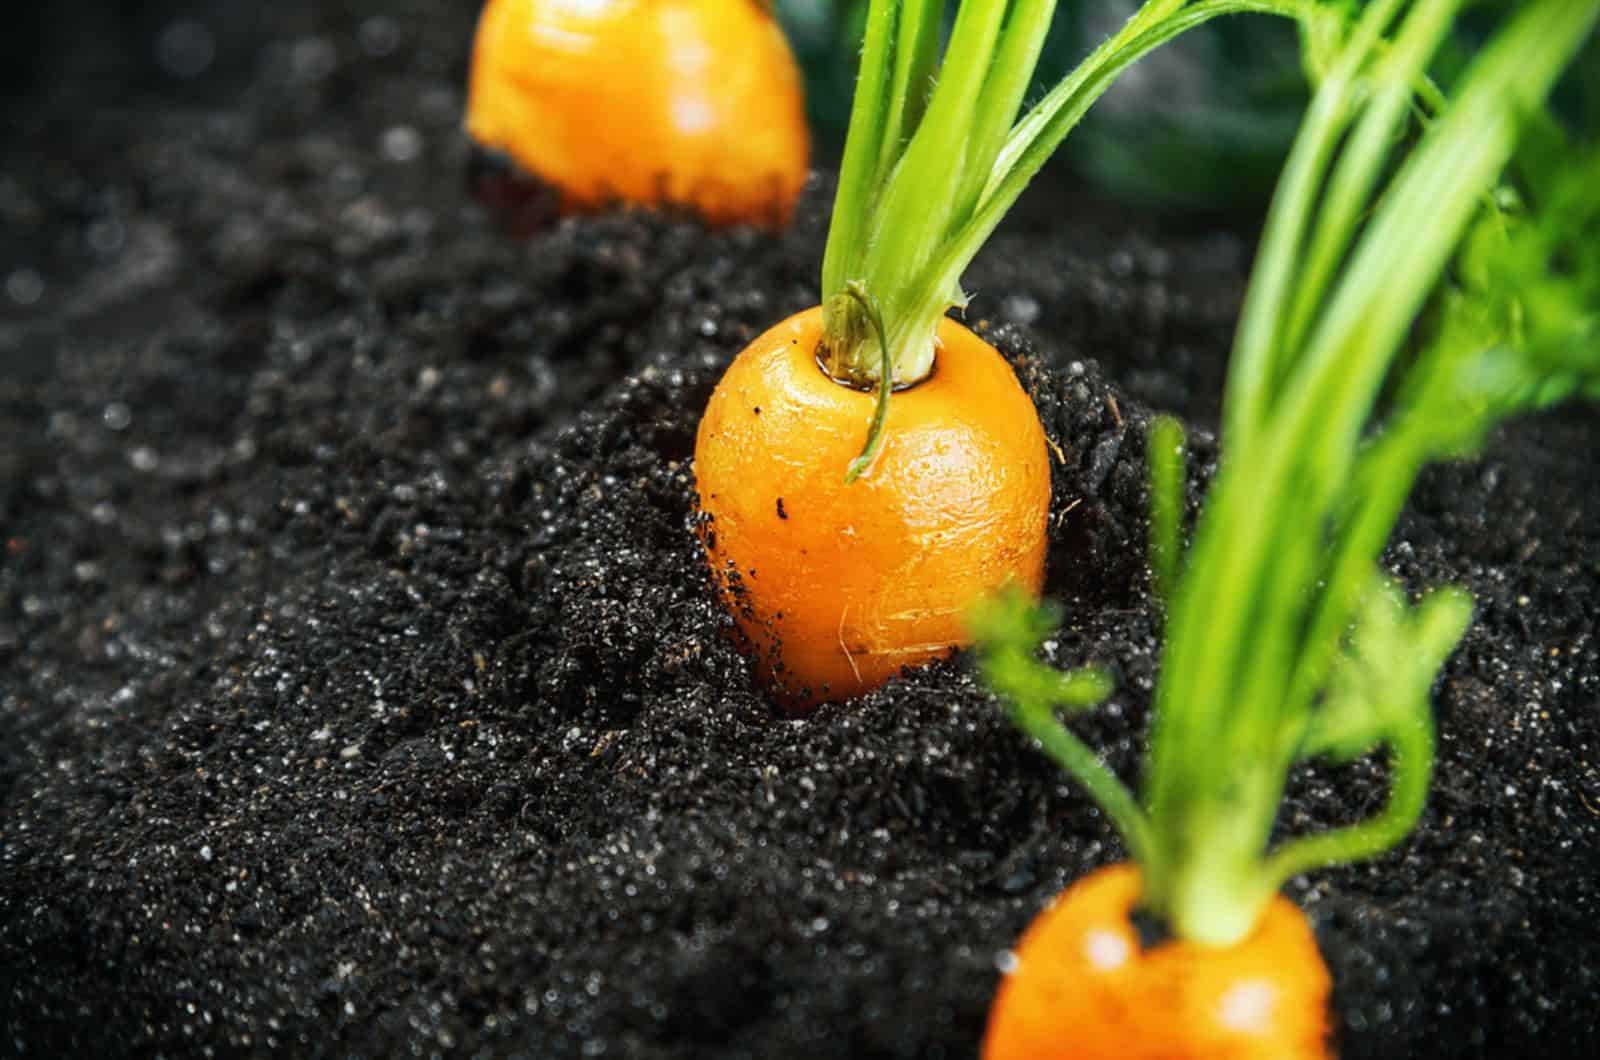 How To Grow And Care For Hydroponic Carrots (With Pro Tips)